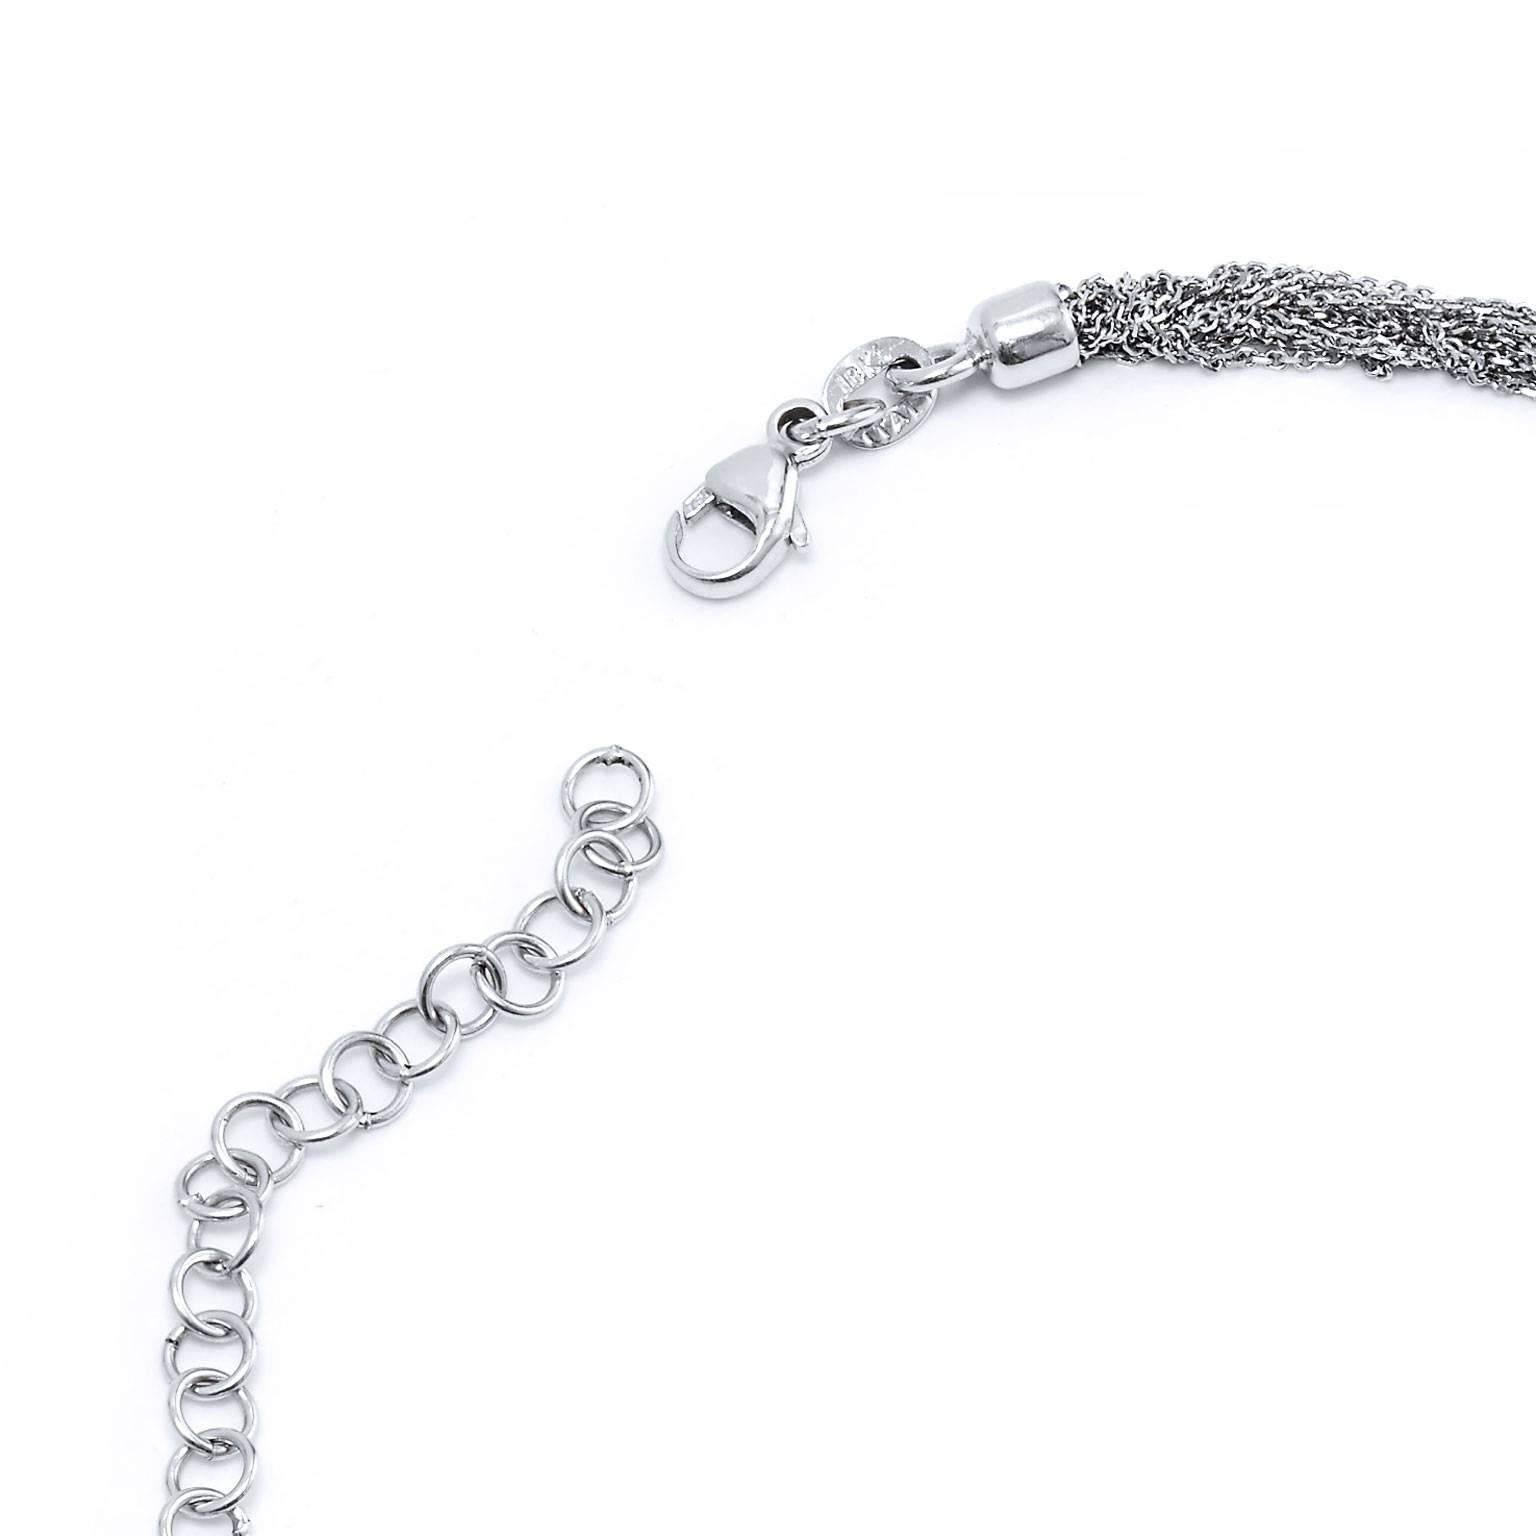 18 karat white gold ten strand cable link 18 inch chain.